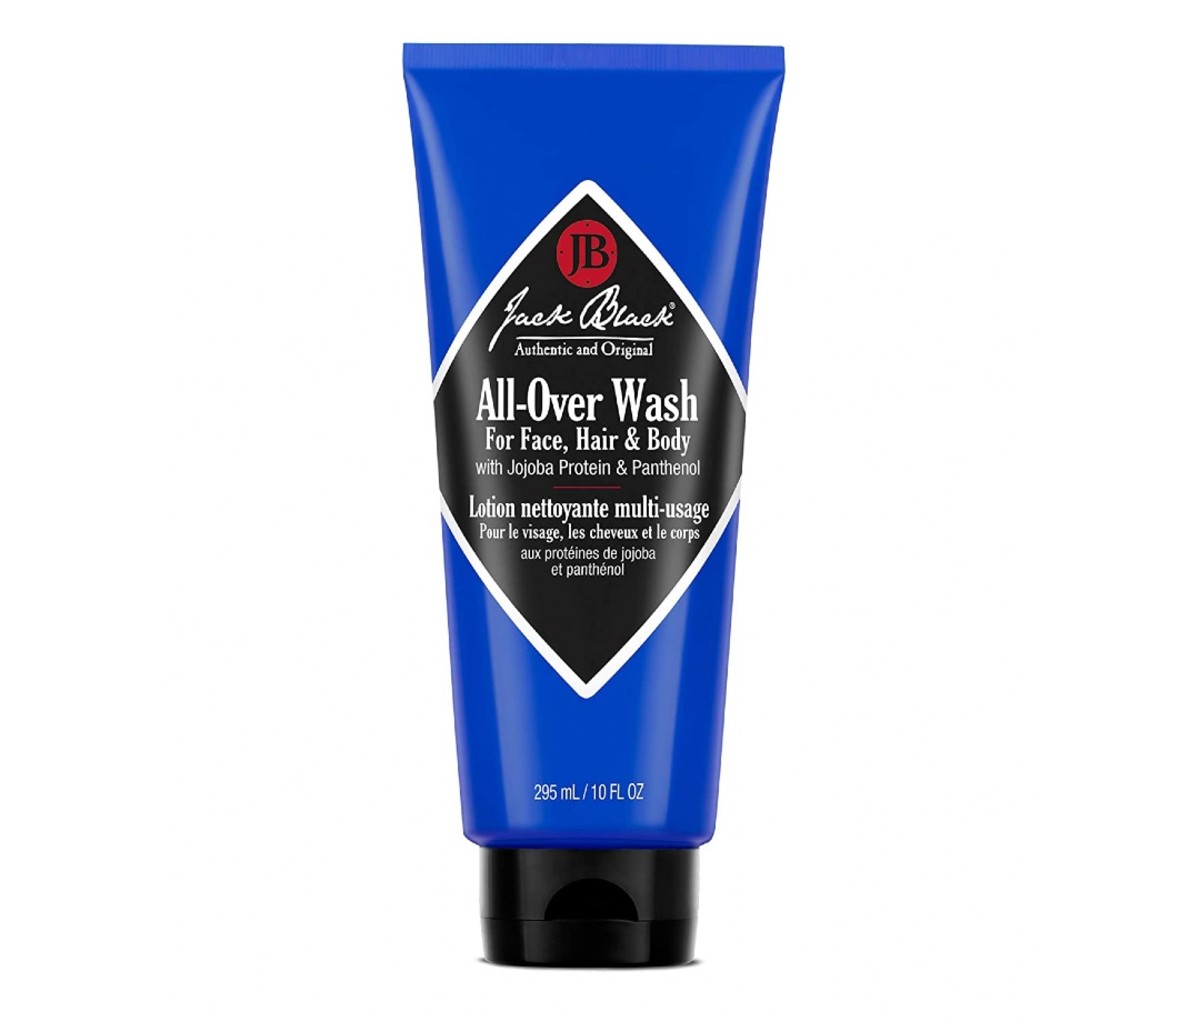 Jack Black's All-Over Wash for face, hair and body